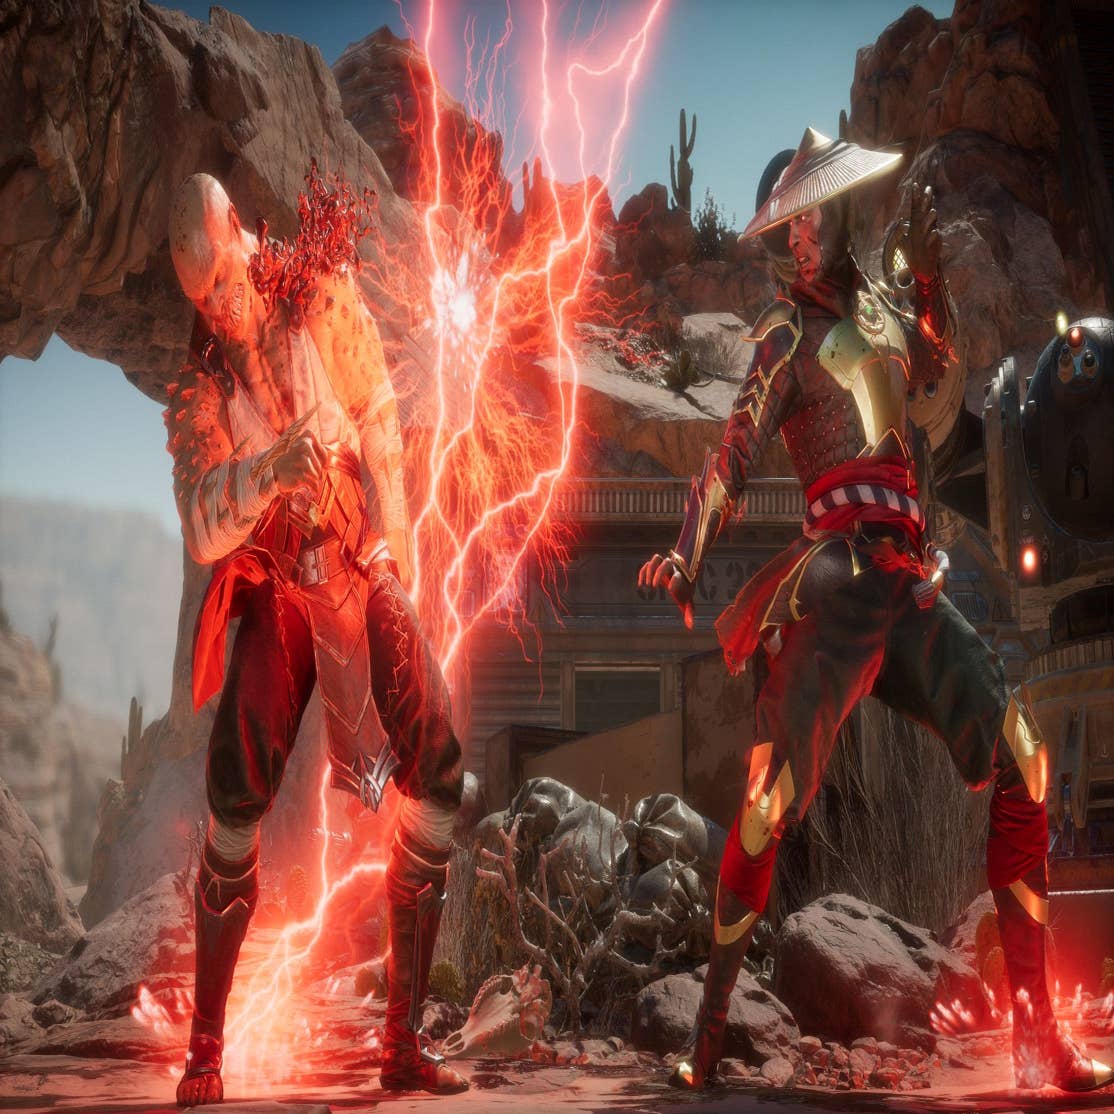 All the Konfirmed Mortal Kombat 11 Characters from Today's Reveal